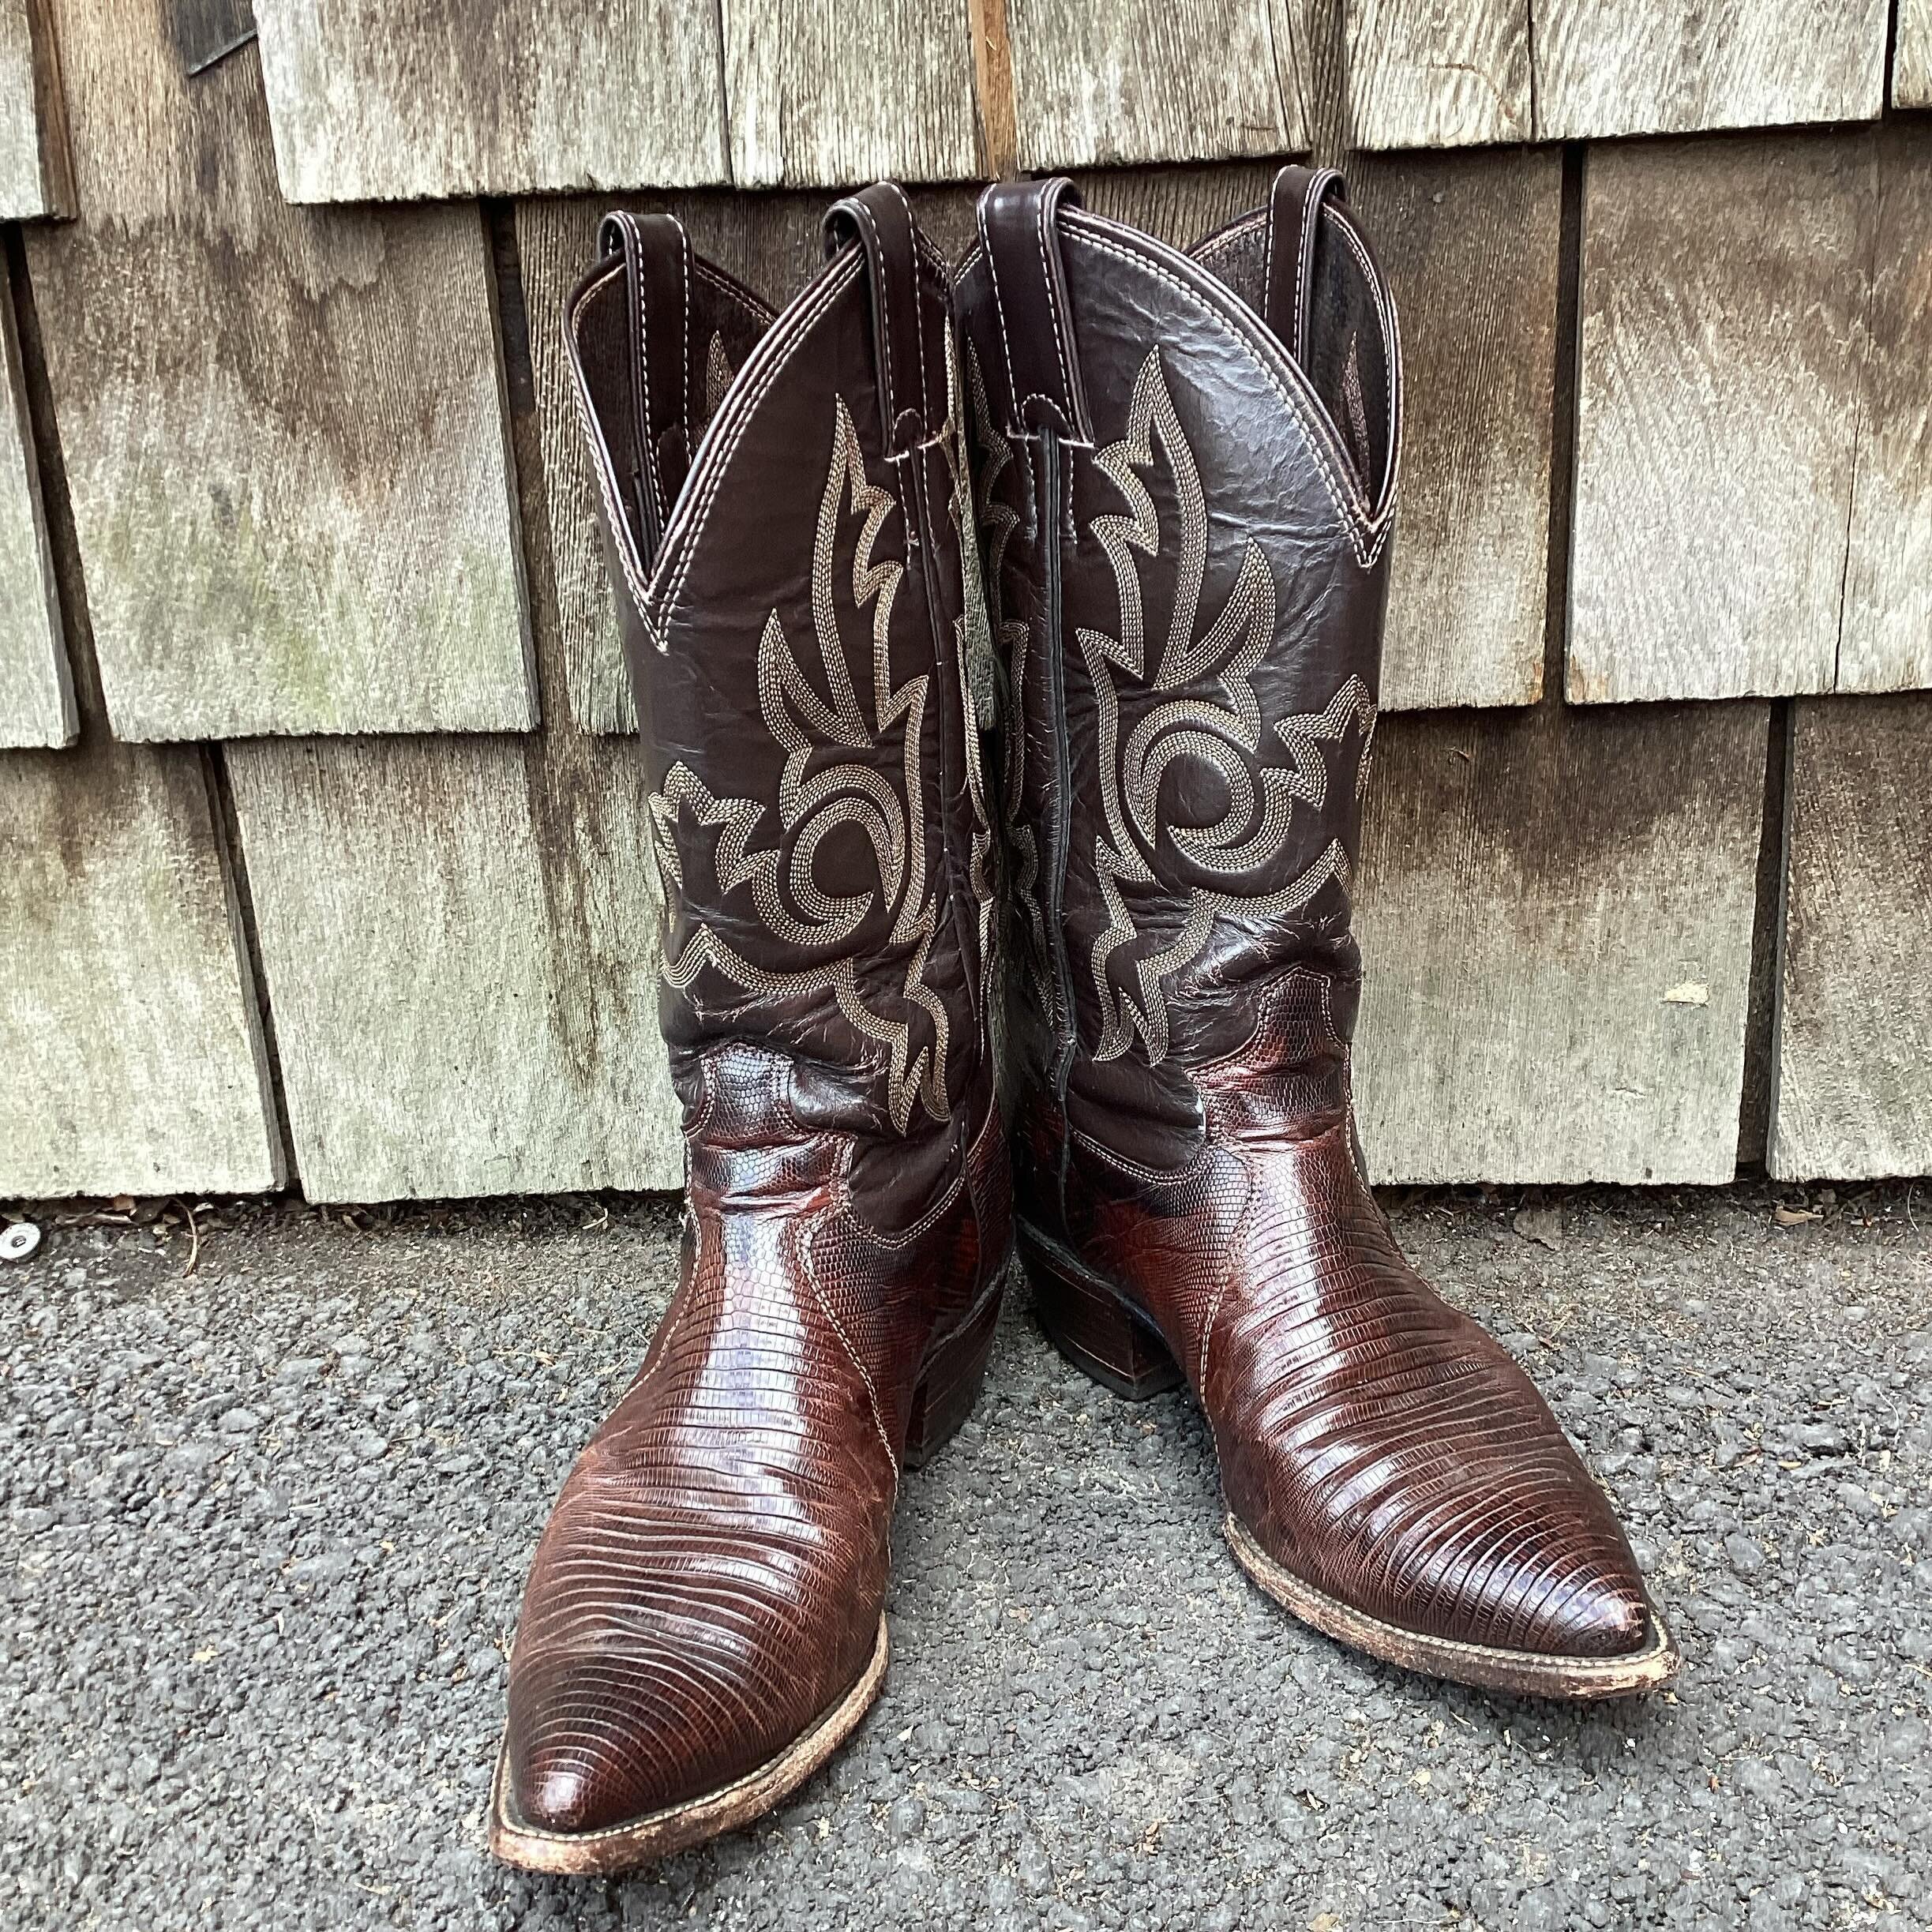 Size 9 Vintage Justin Cowgirl Boots.
#perfect #classic #timeless #authentic #practical #beautiful